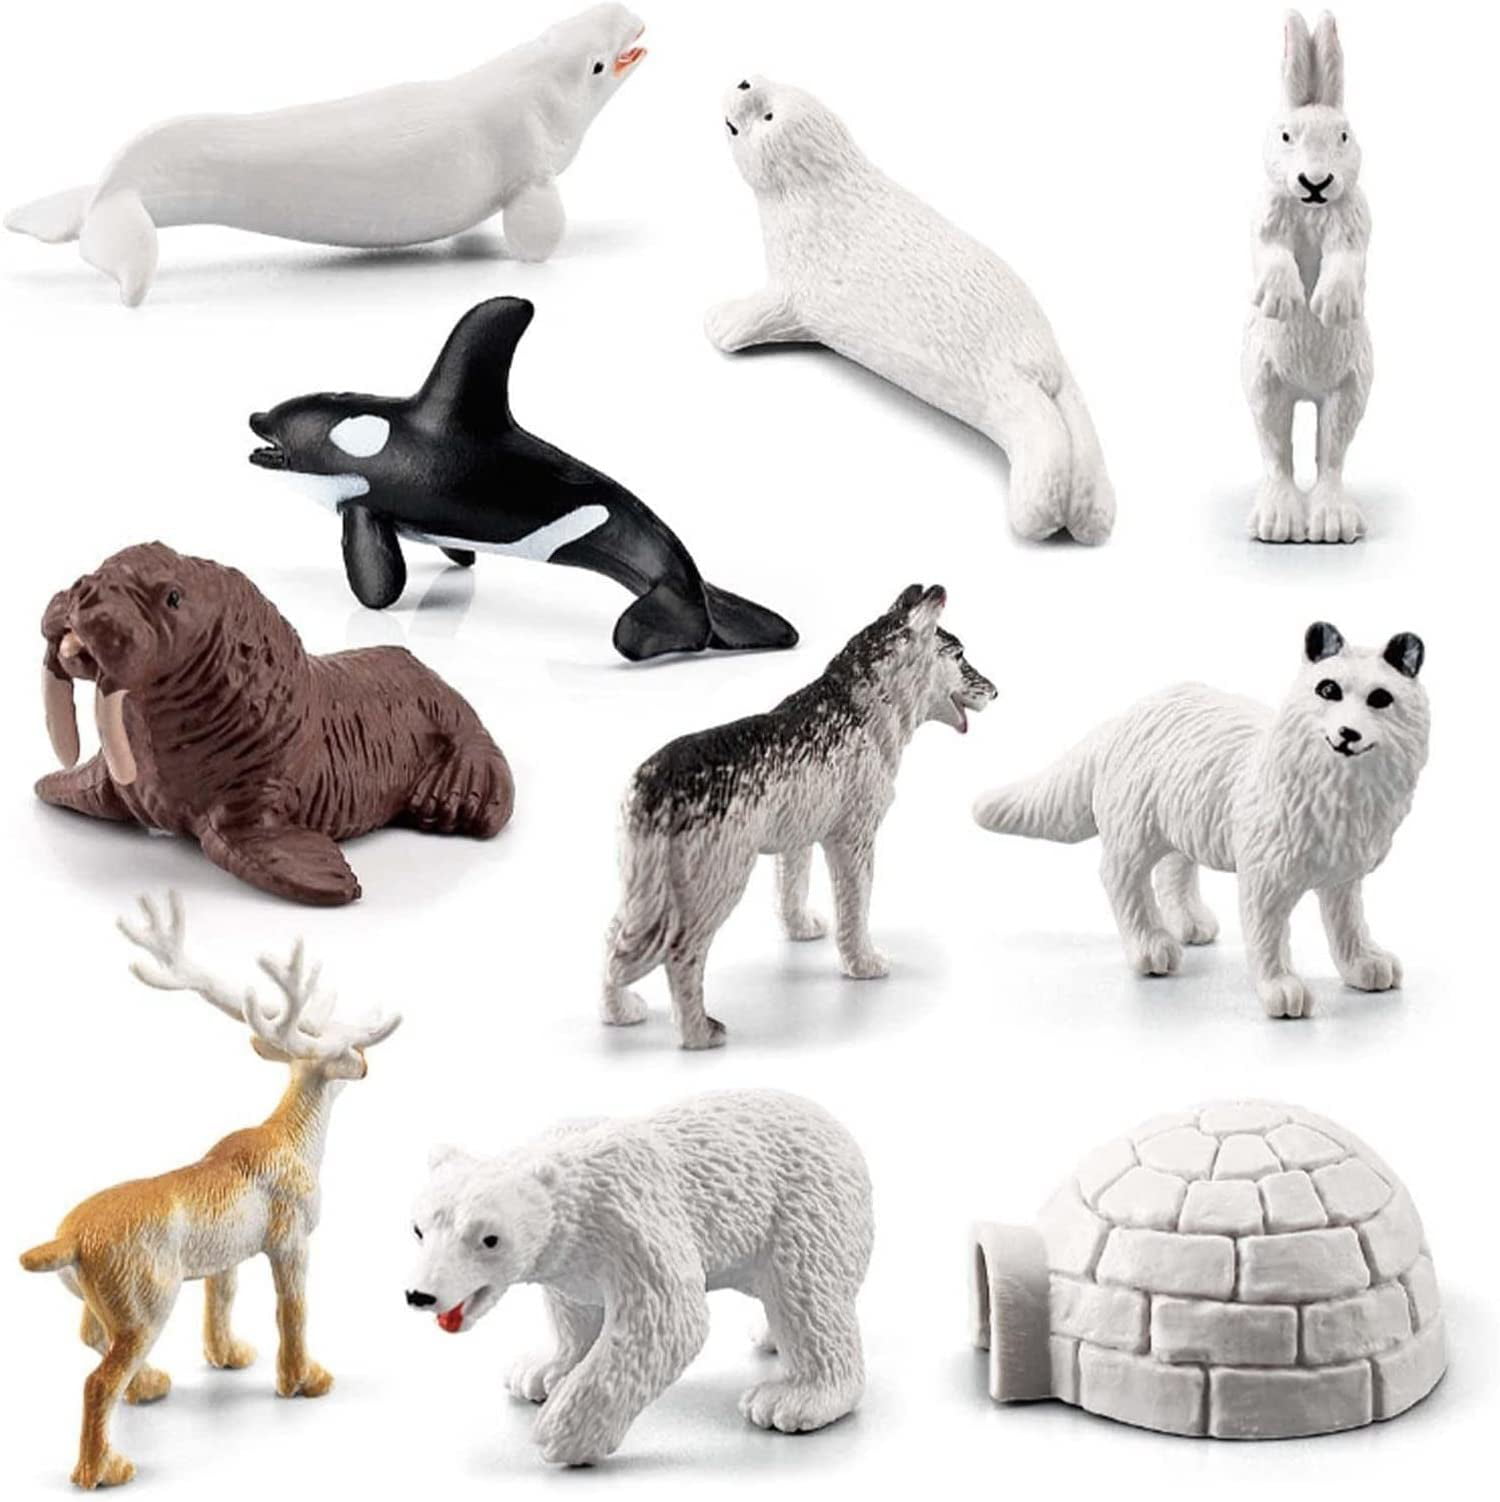 12 Pcs Polar Animals Figurines with Igloo Realistic Arctic Animal Figures Toy Playset White Polar Bear Small Animal Toys Plastic Bear Cake Topper for Birthday Baby Shower Christmas Party Decorations 